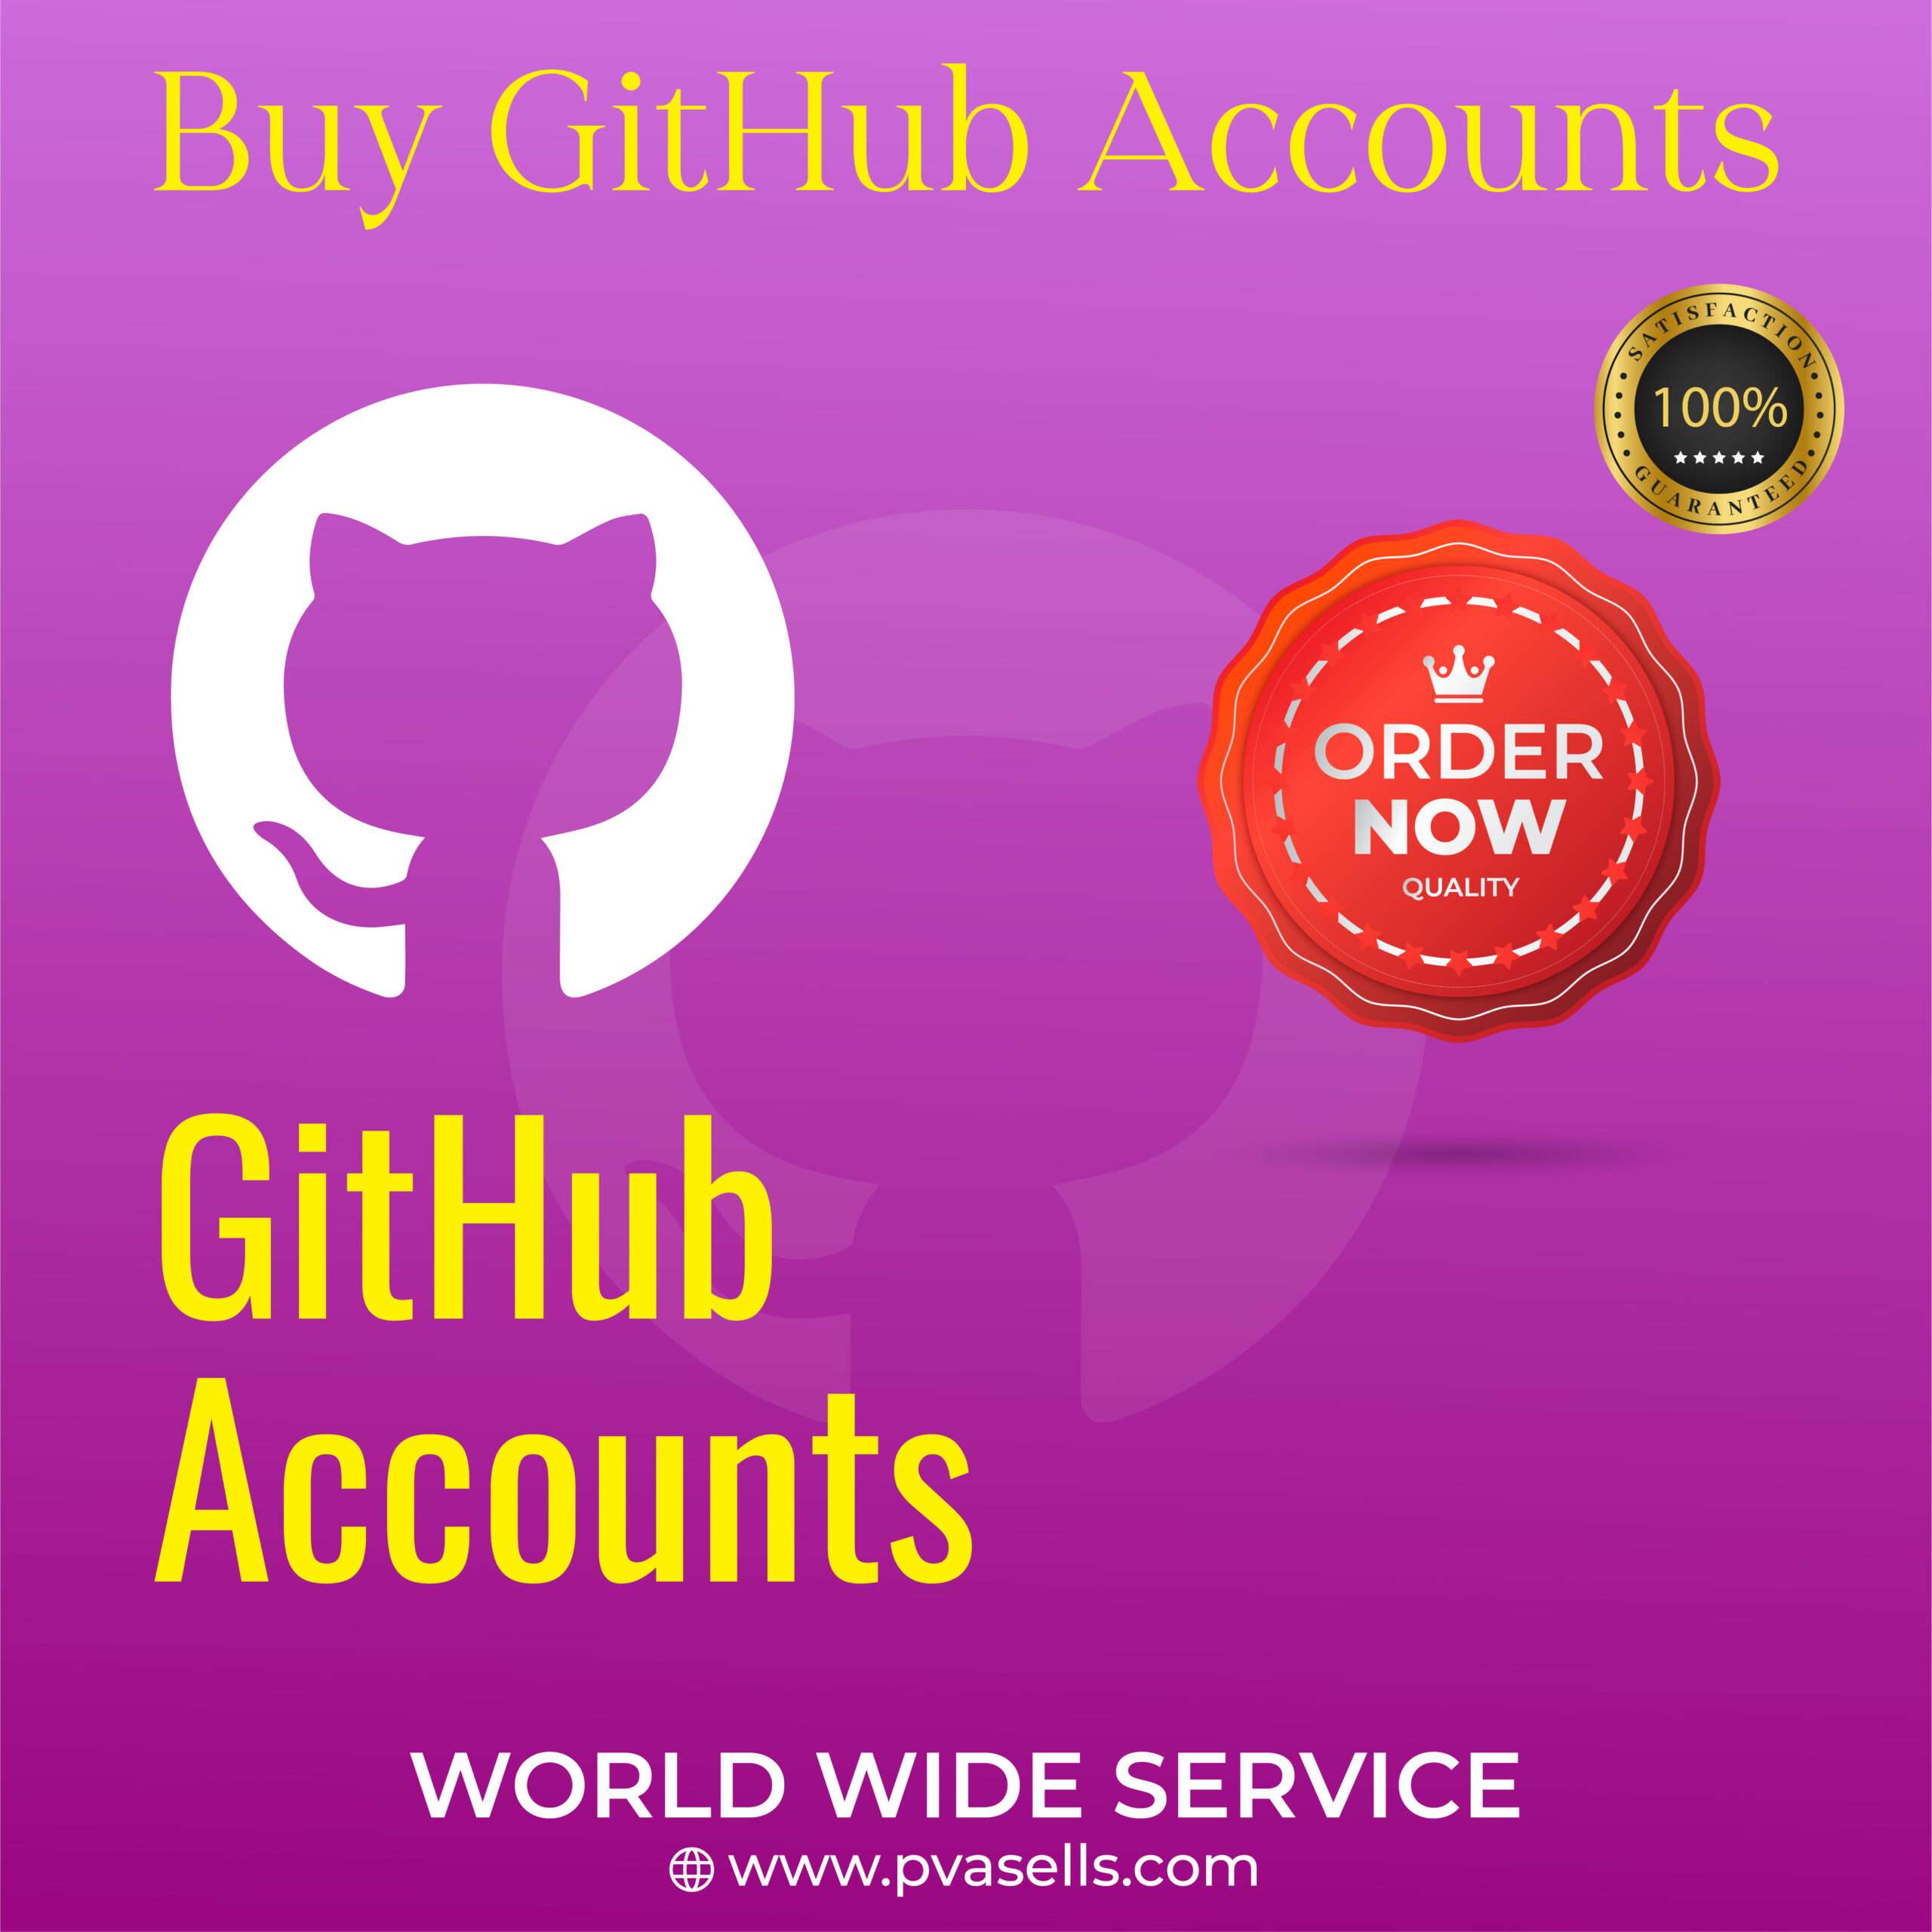 Buy GitHub Accounts - Real, Legit & Fast Delivery...